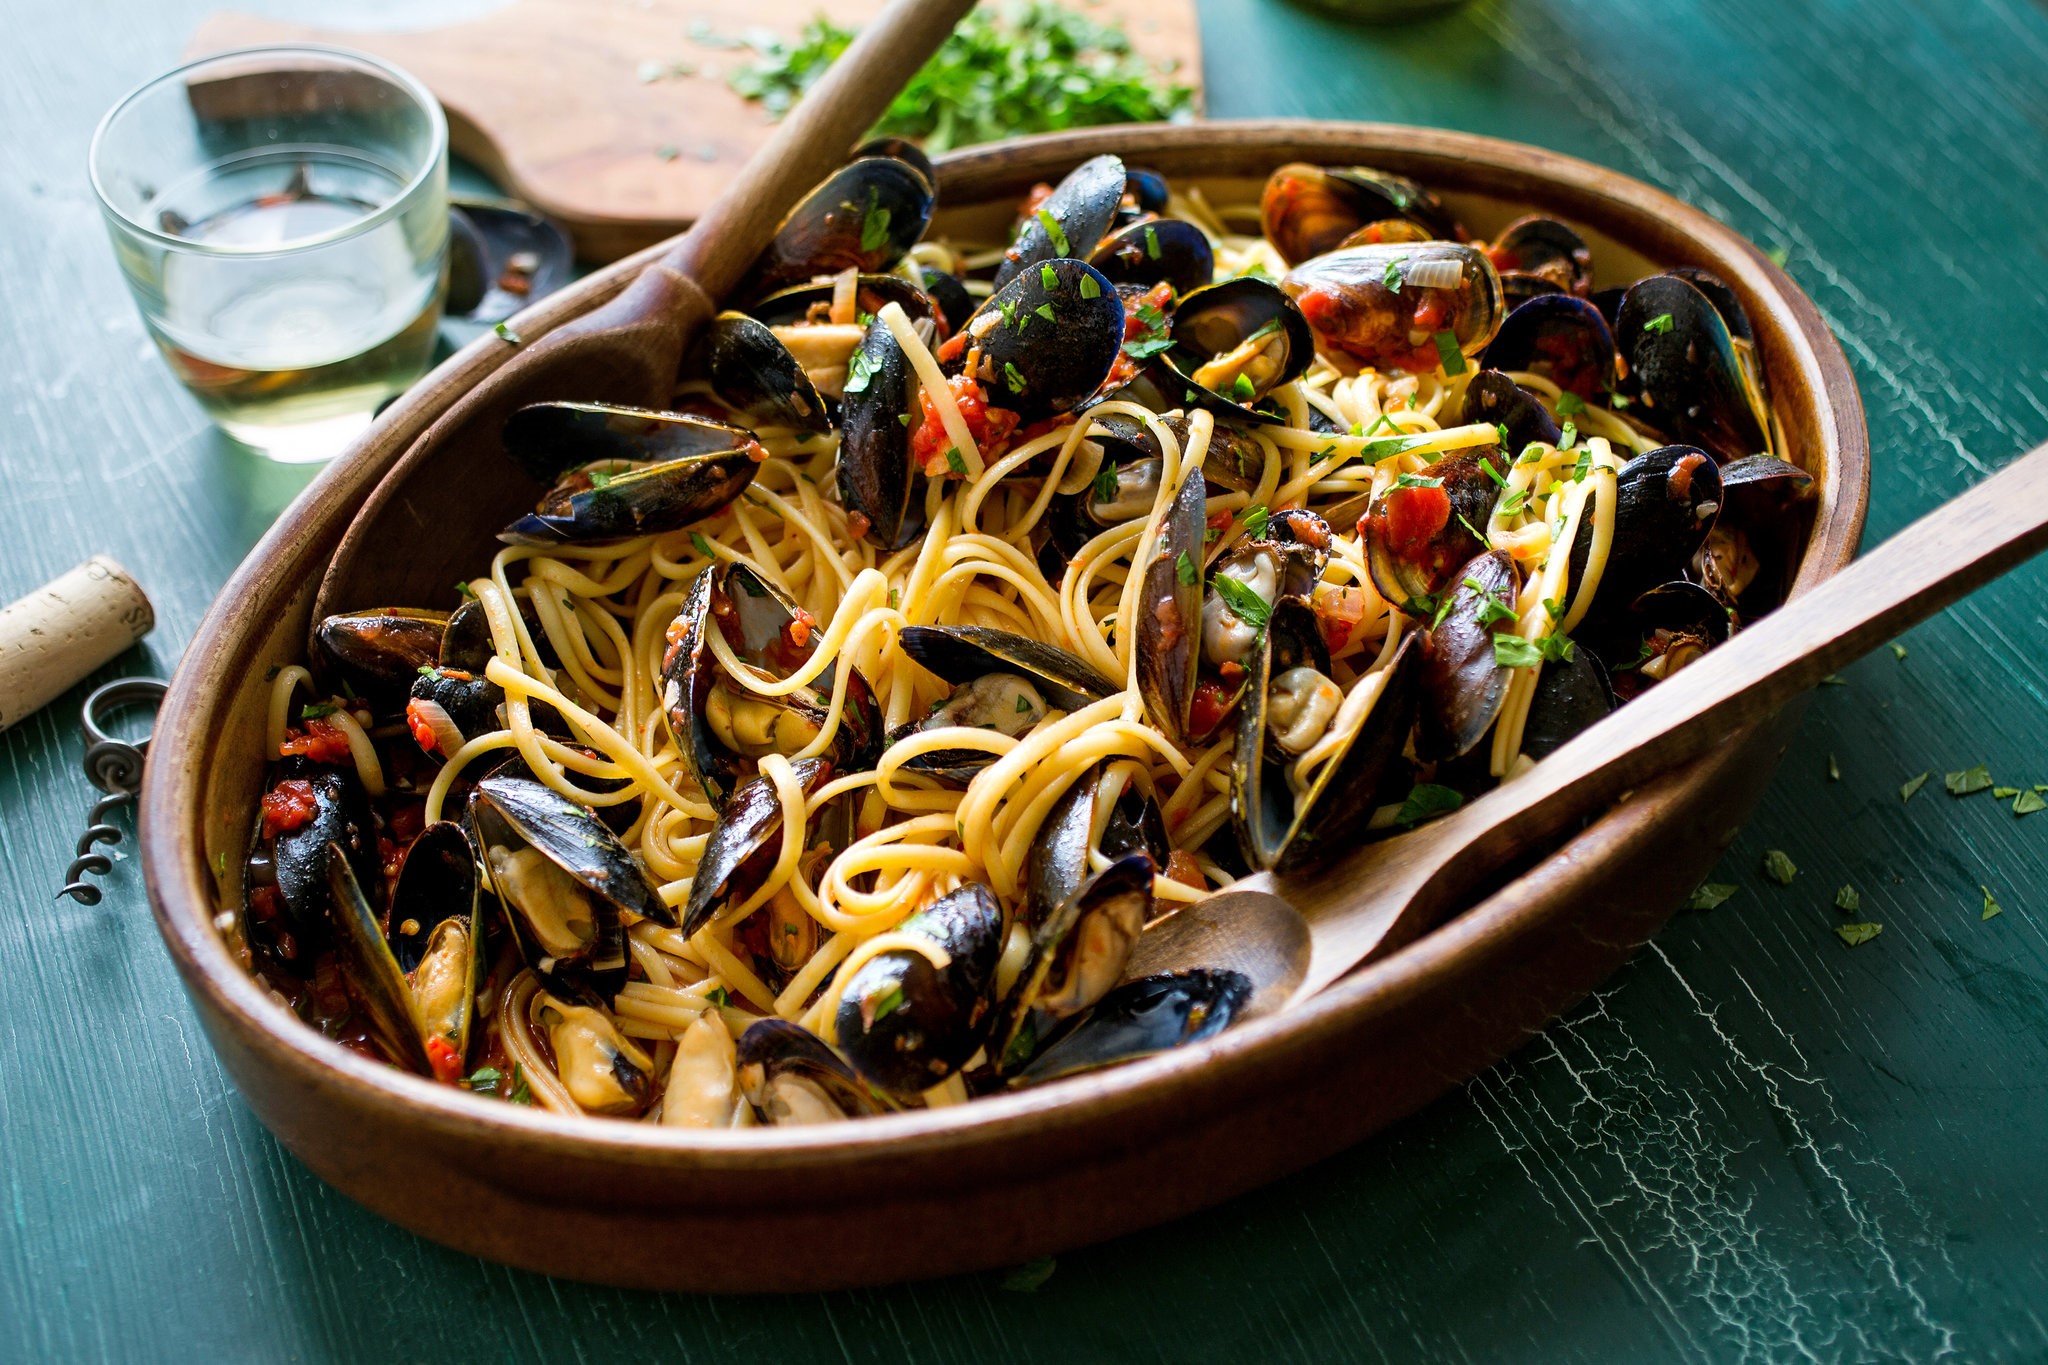 American Pasta With Mussels in Tomato Sauce Recipe Appetizer